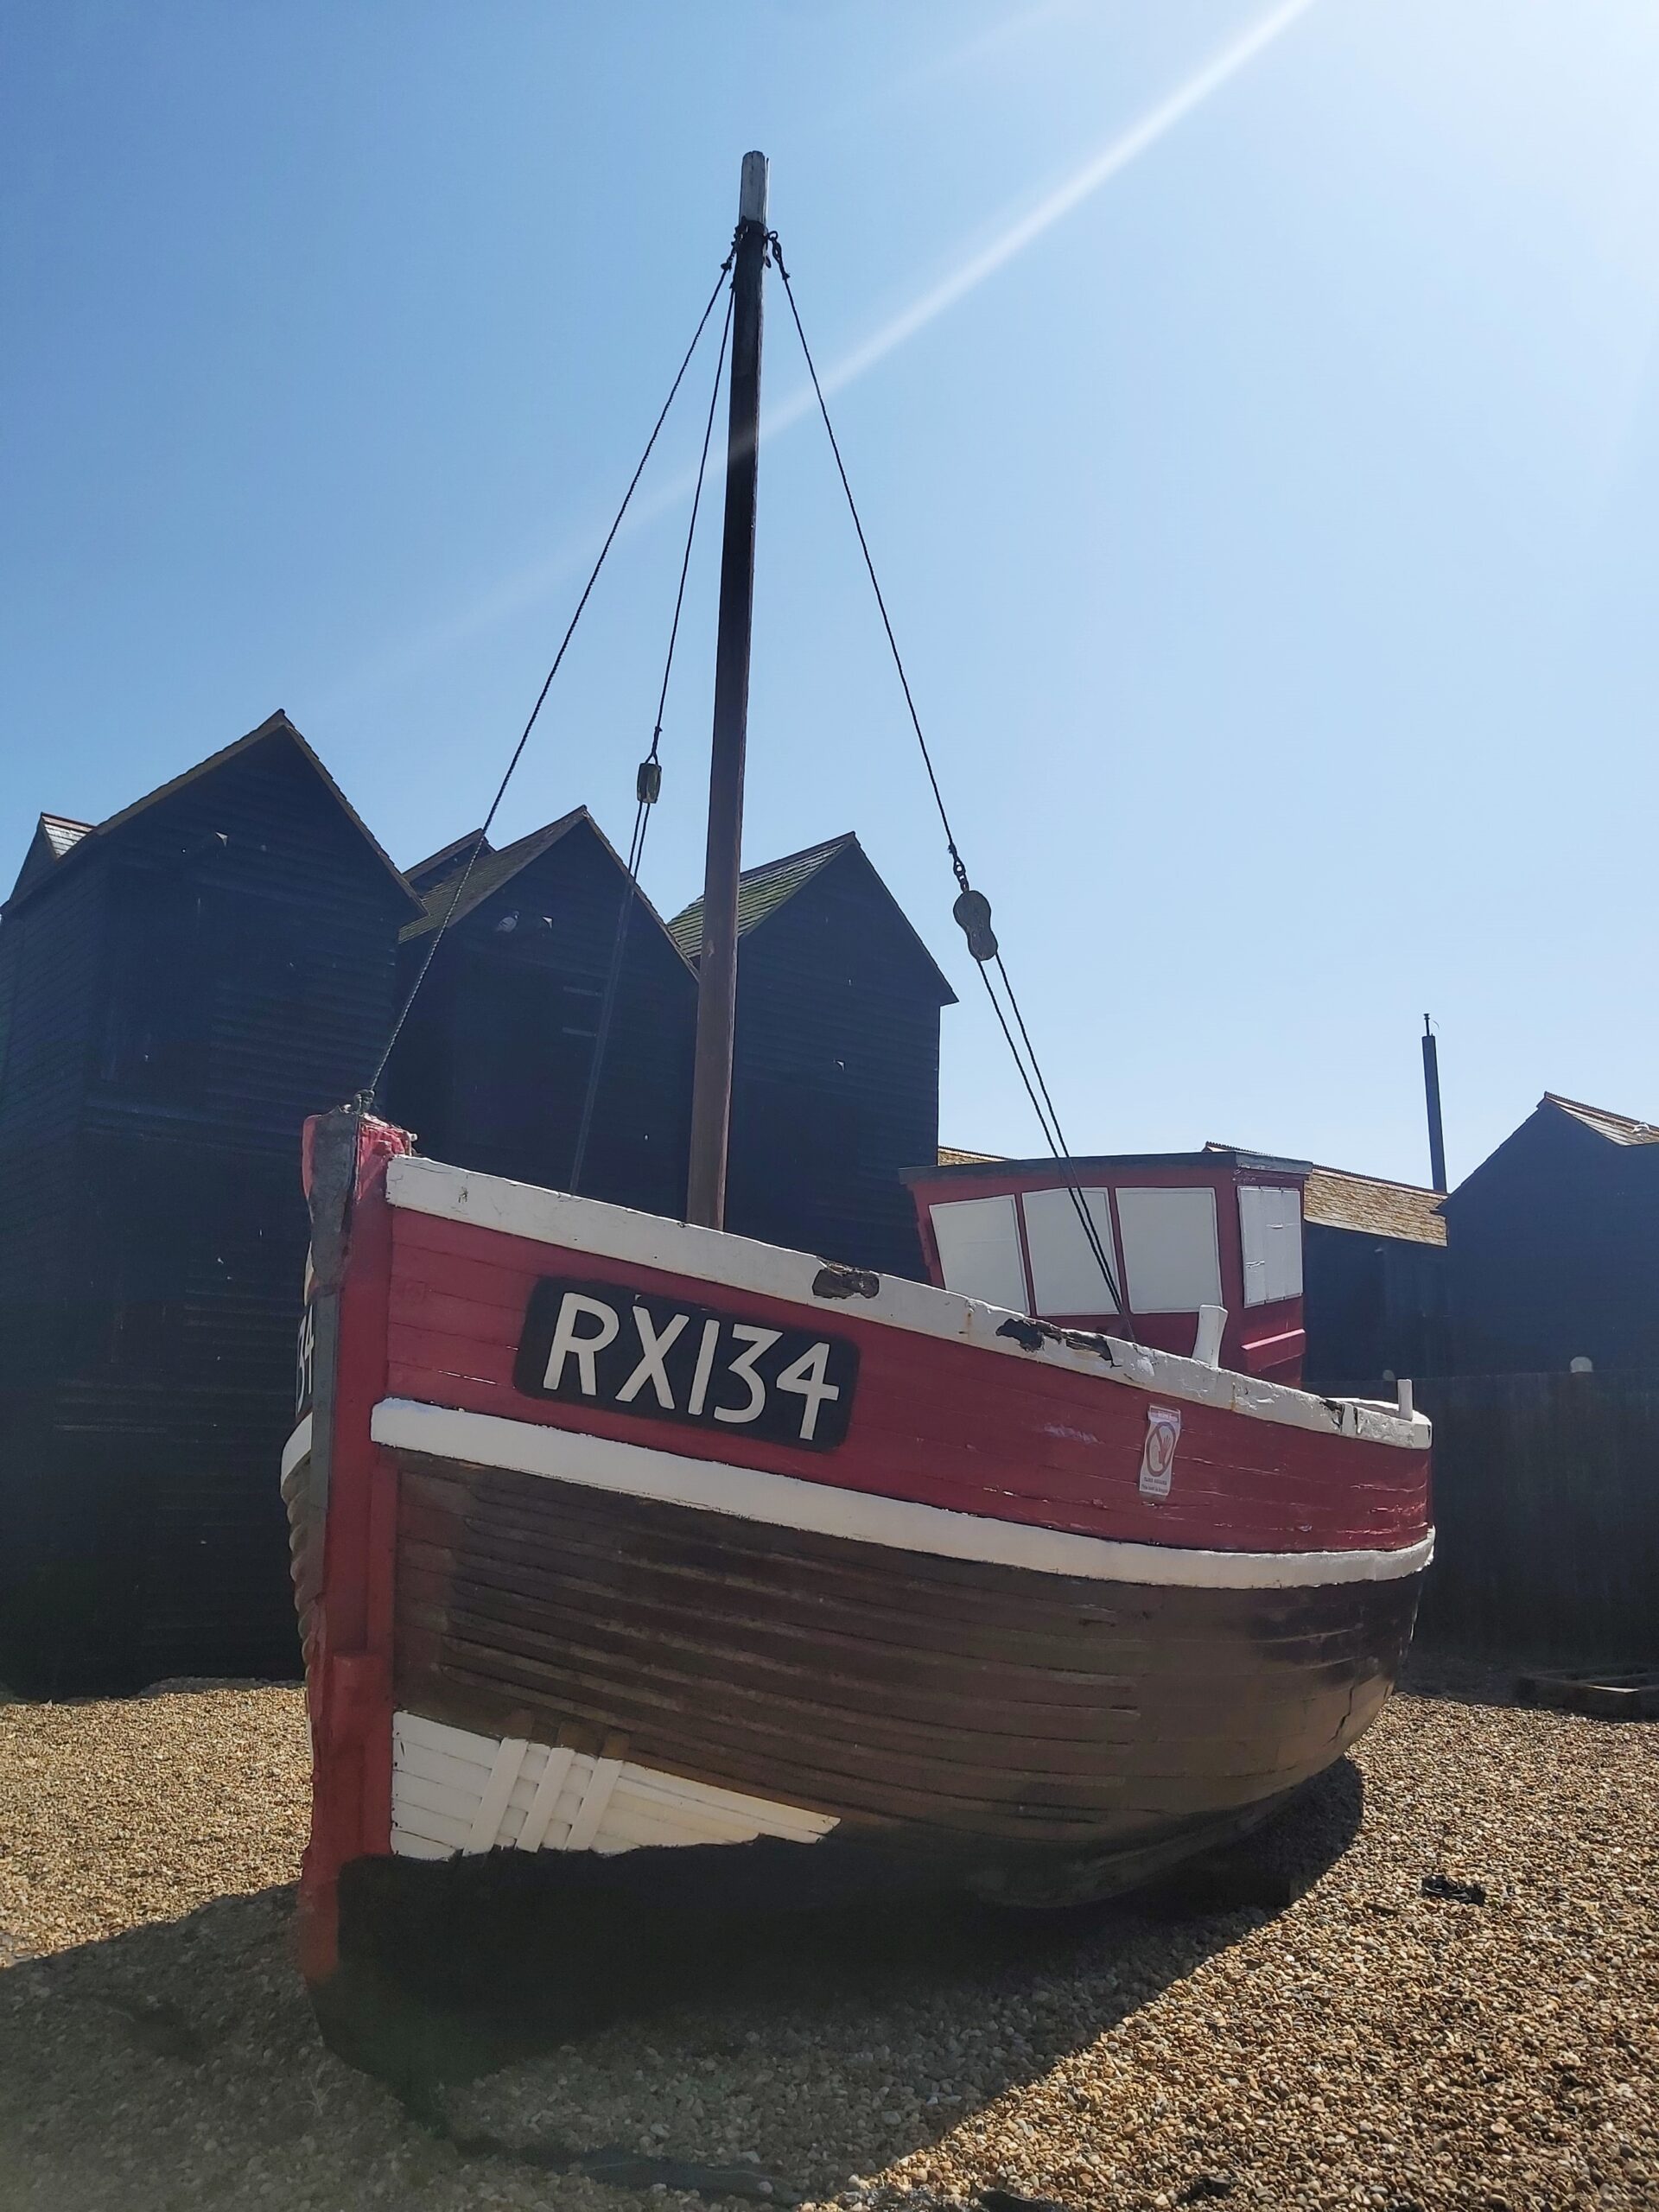 A red and brown boat in Hastings, England